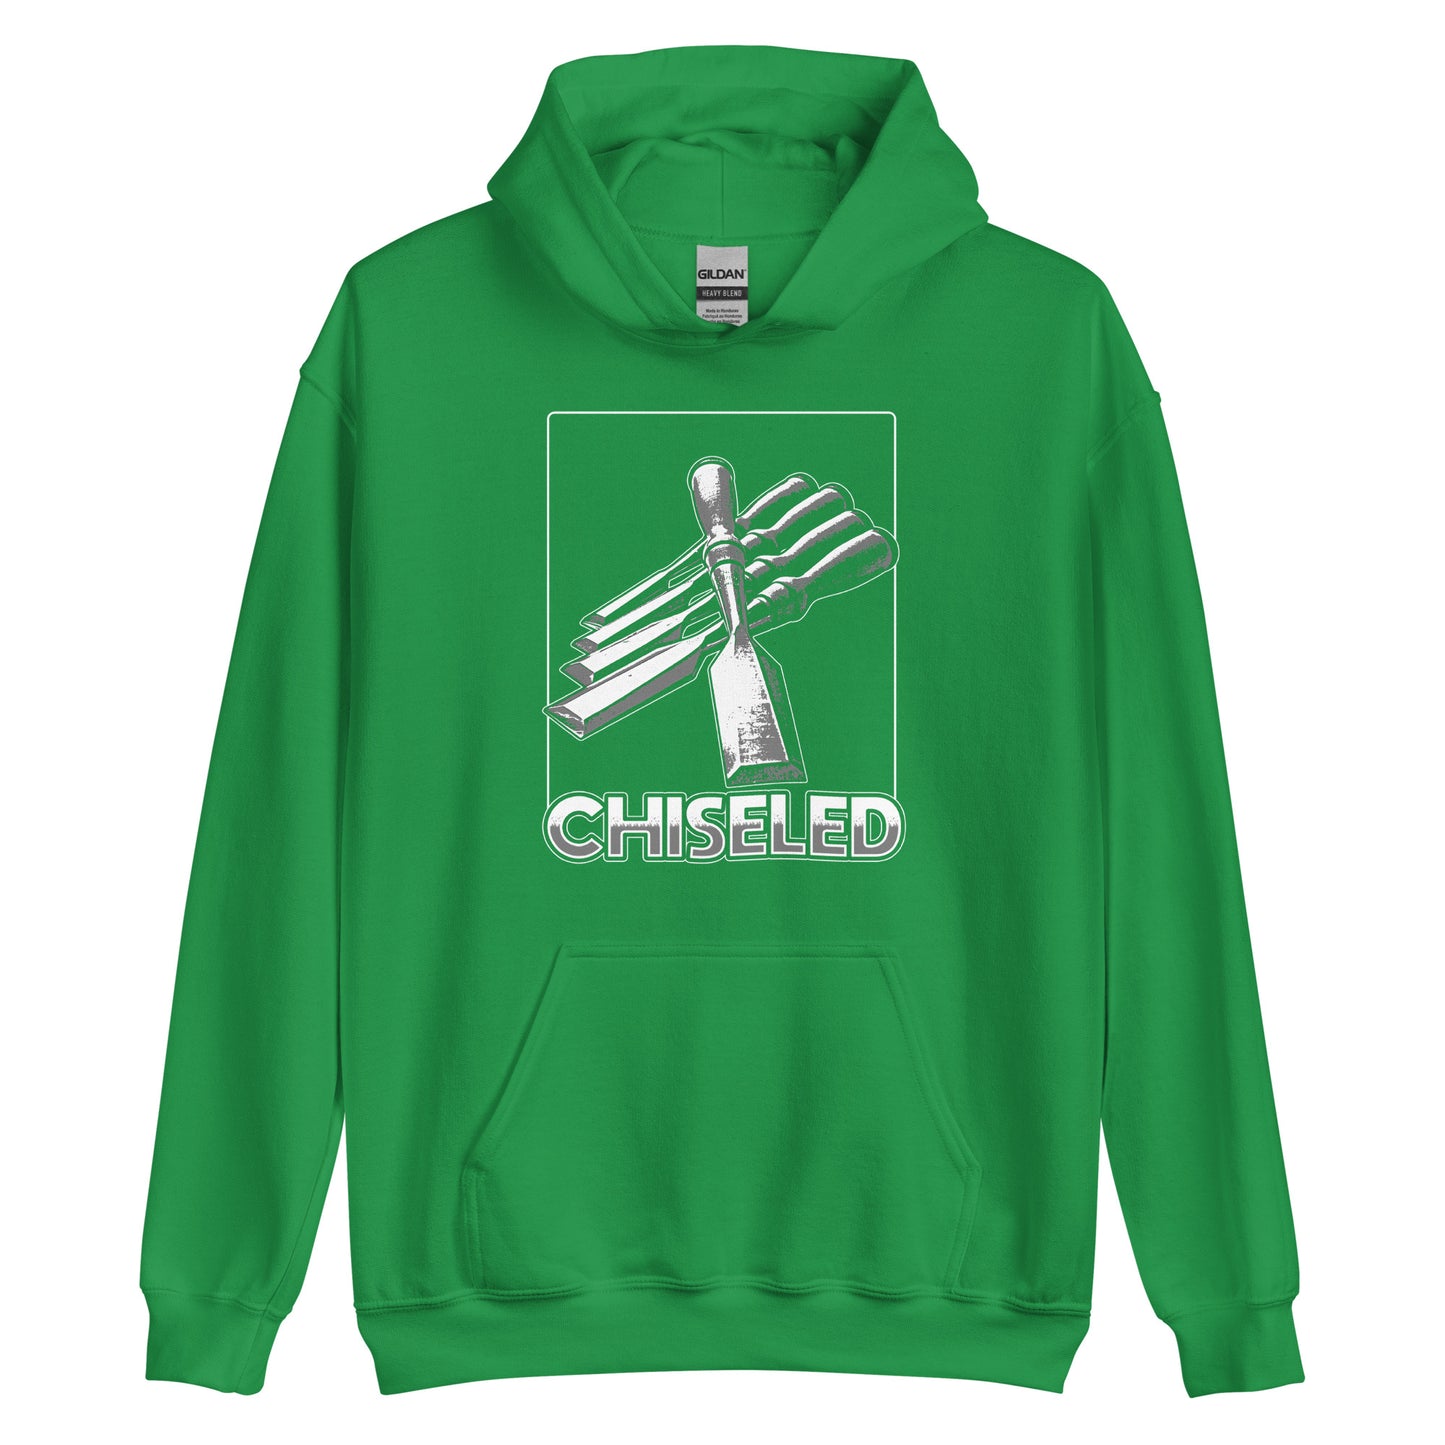 "Chiseled" Unisex Hoodie for Woodworkers (Multiple Colors)